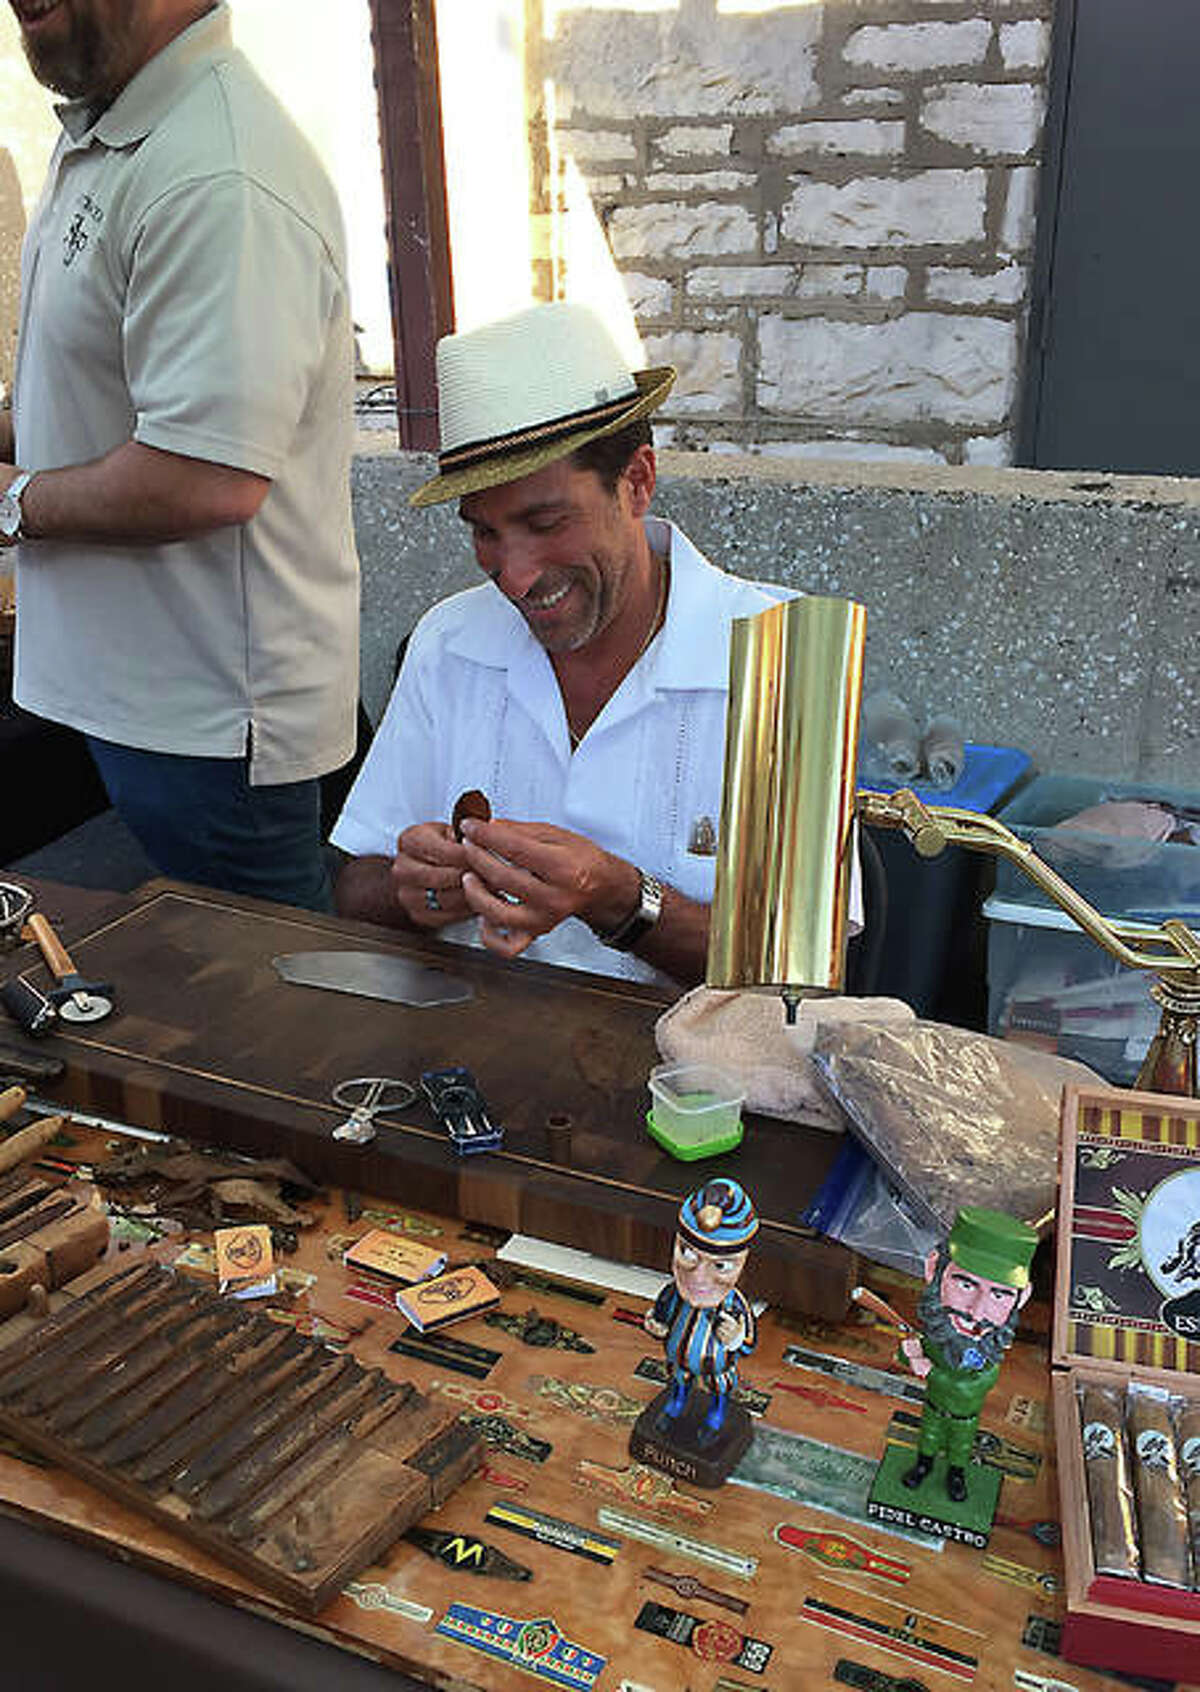 Scott Biancardi of STL Cigars is seen hand-rolling cigars during the first Hand Rolled Cigar Networking Event in 2017 outside of Bluff City Grill on Broadway in Alton. This year marks the third year for the event presented by Derrick and Kathleen Richardson of Alton.